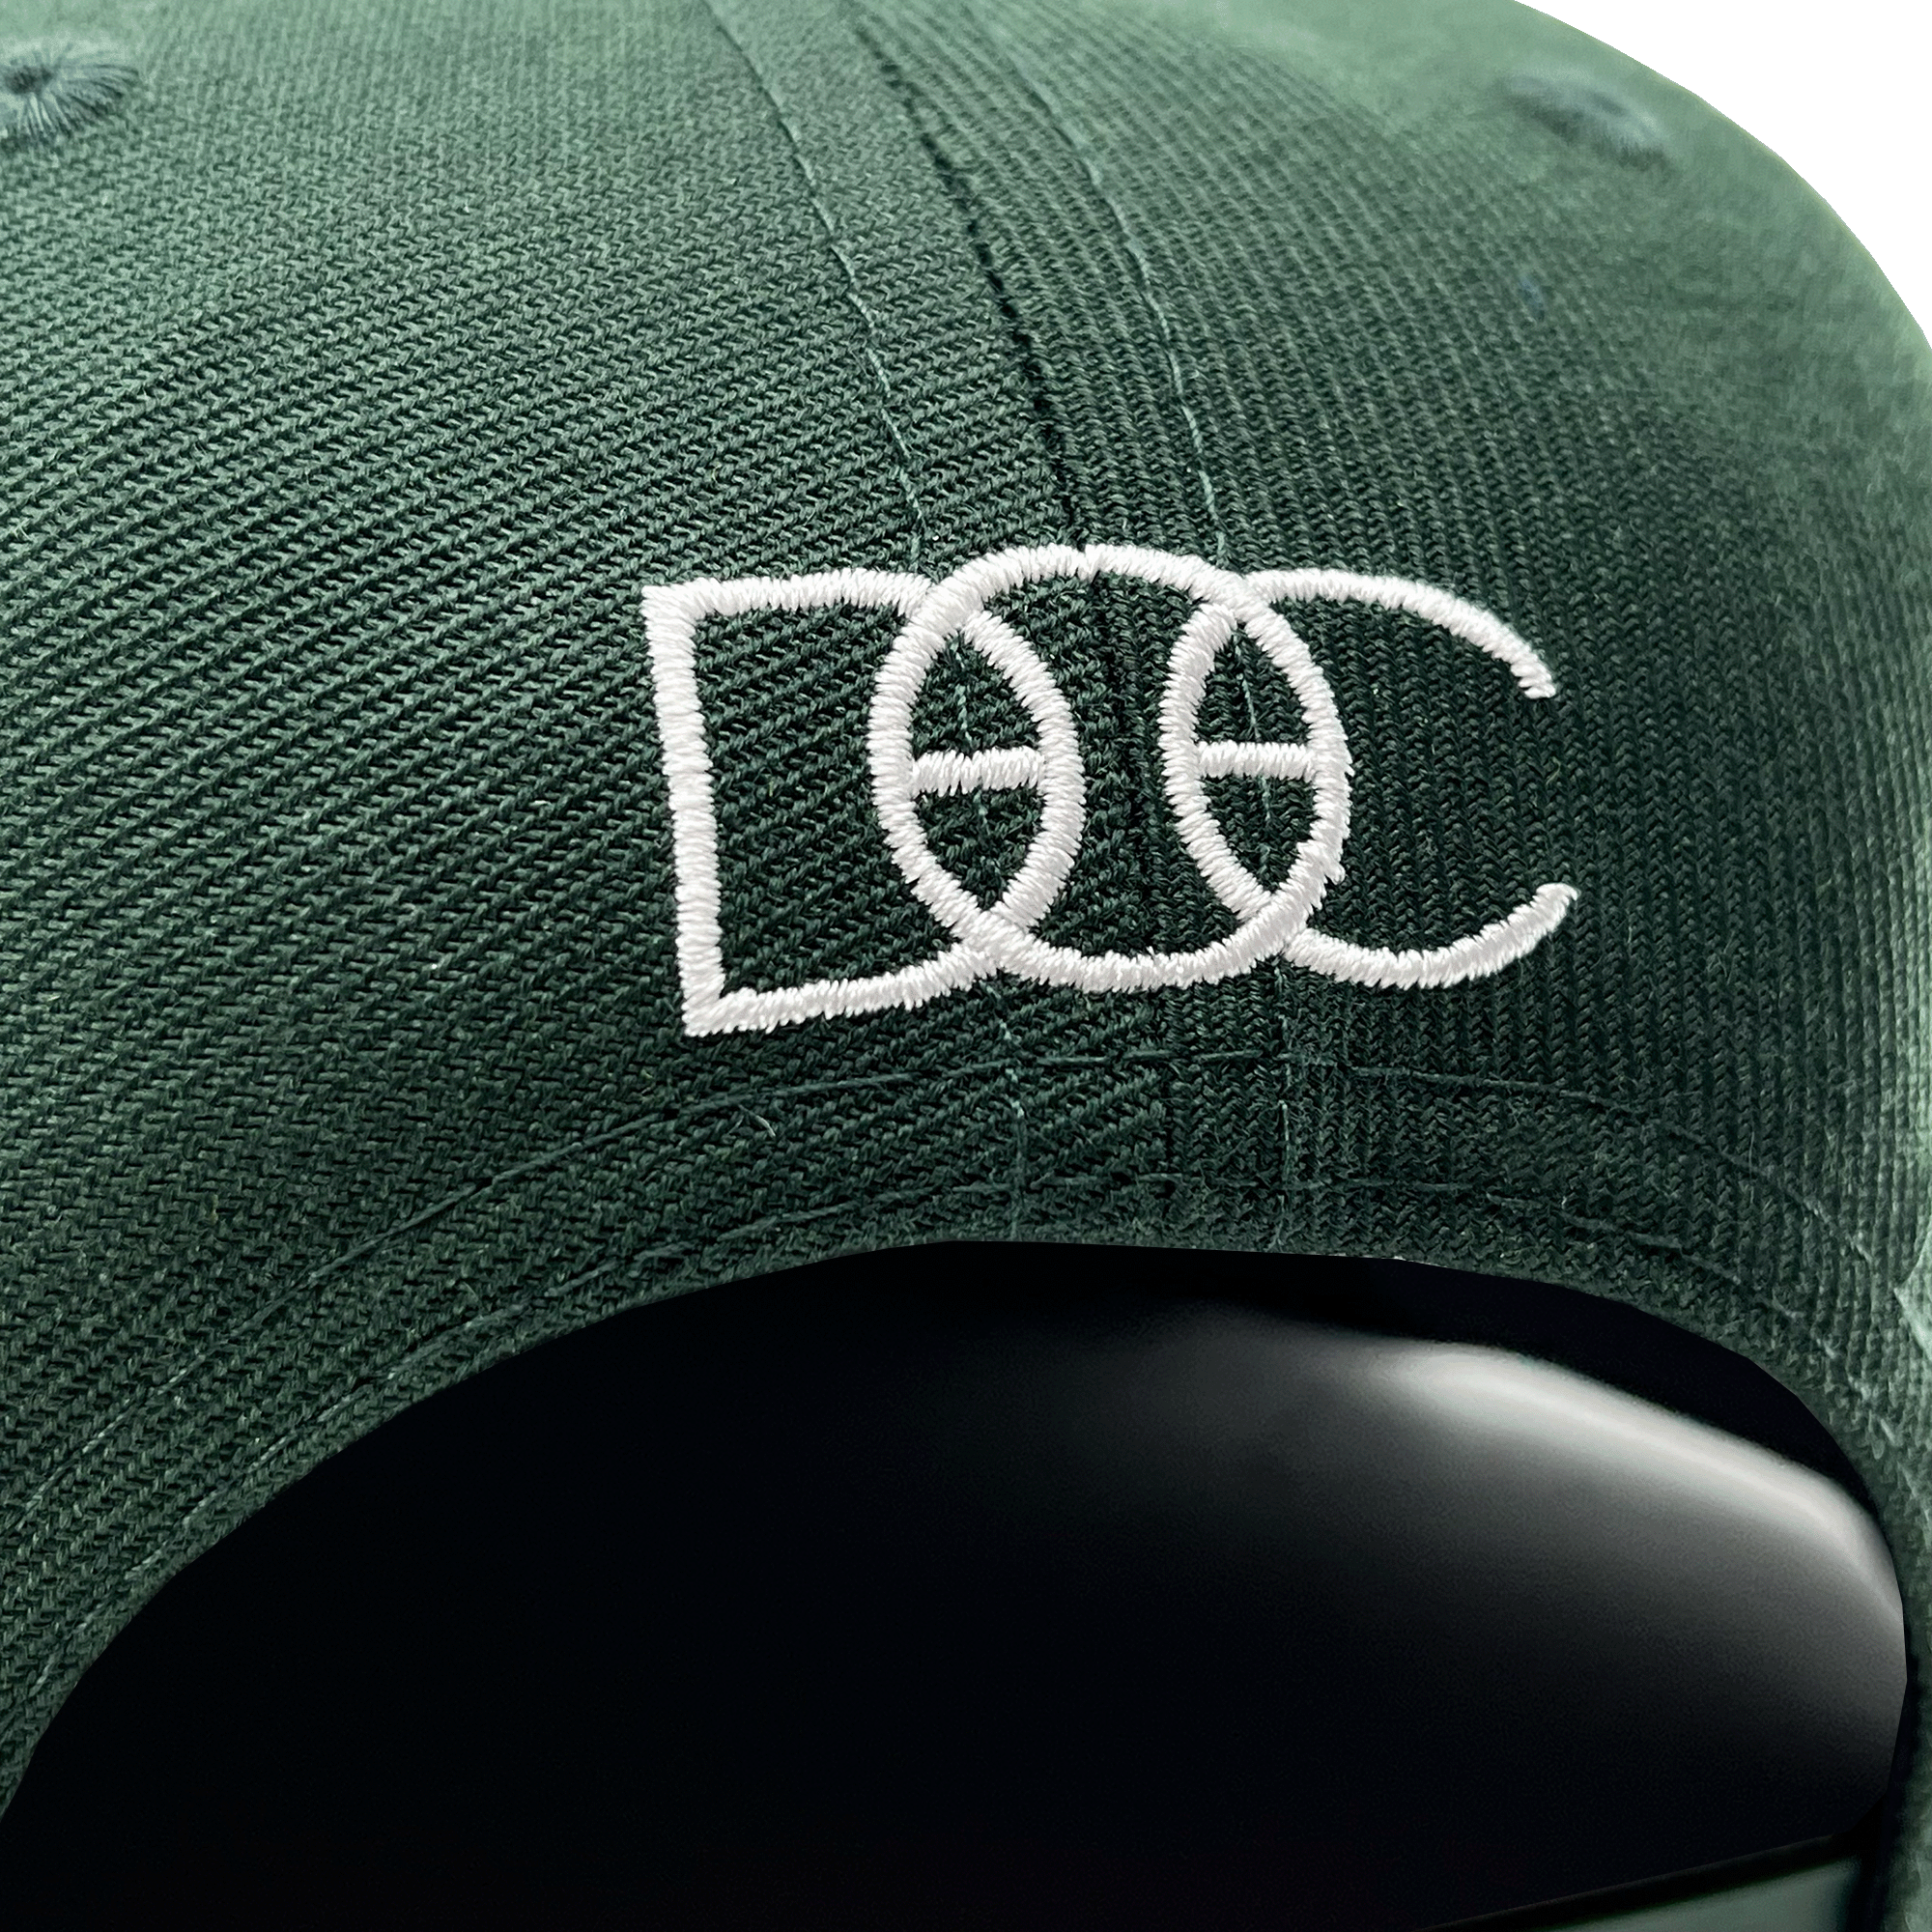 Close-up of the white embroidered DOC wordmark on the back of a green cap.